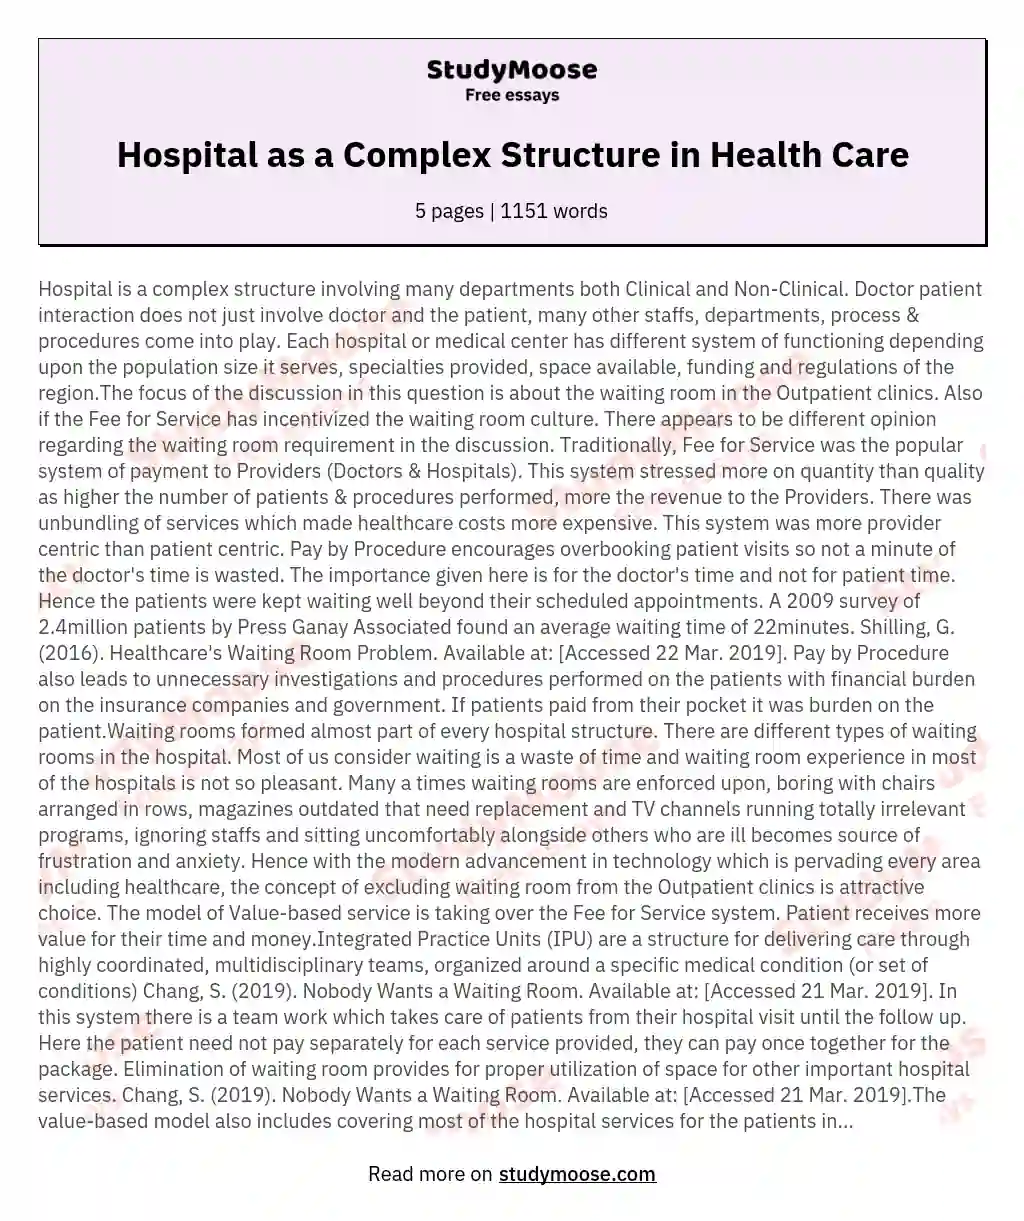 Hospital as a Complex Structure in Health Care essay